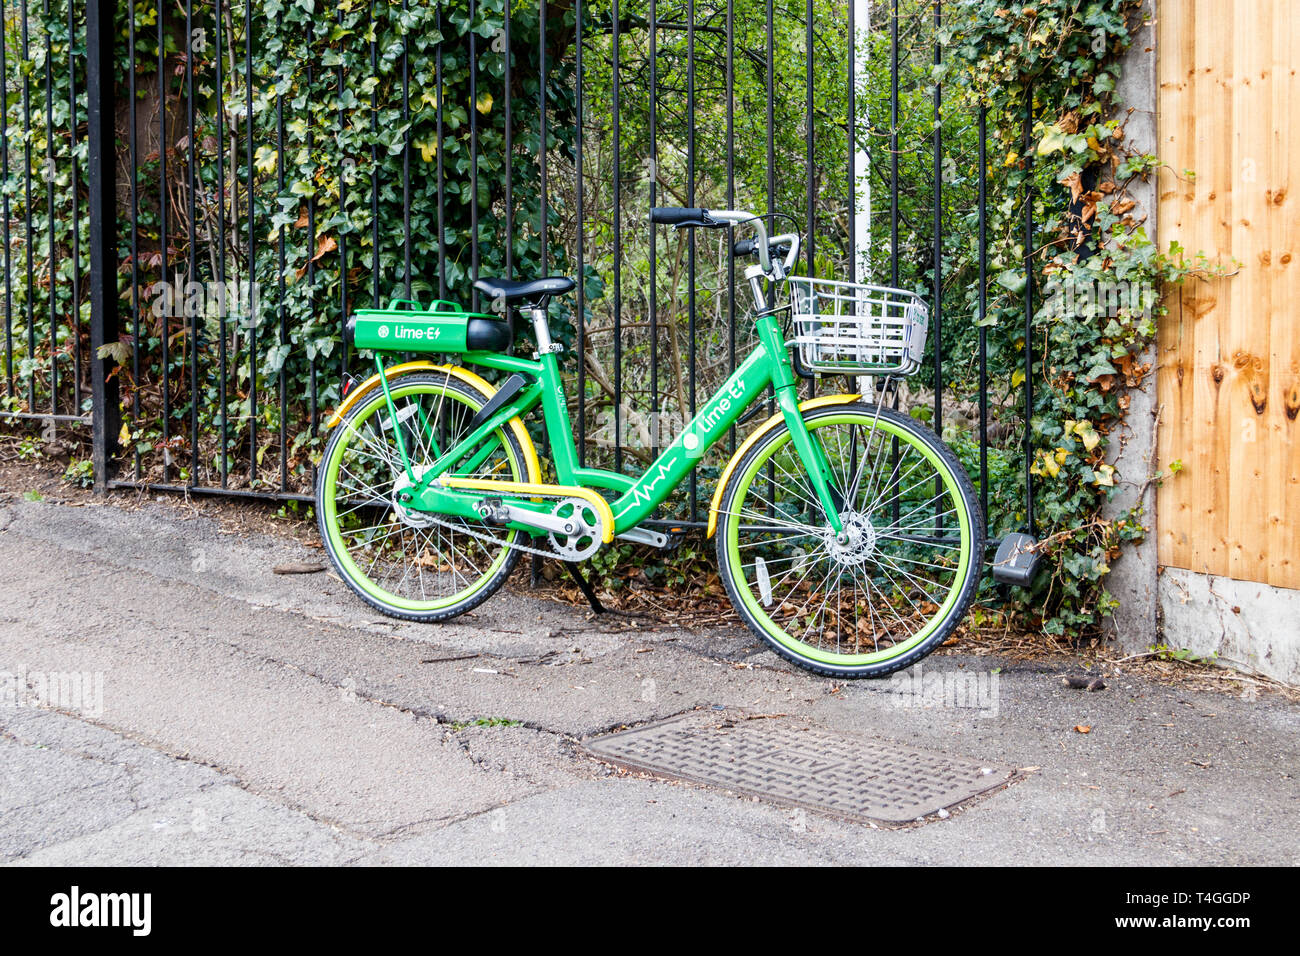 A Lime-E dockless electric assist bike by the side of the road in Highgate, North London, UK Stock Photo